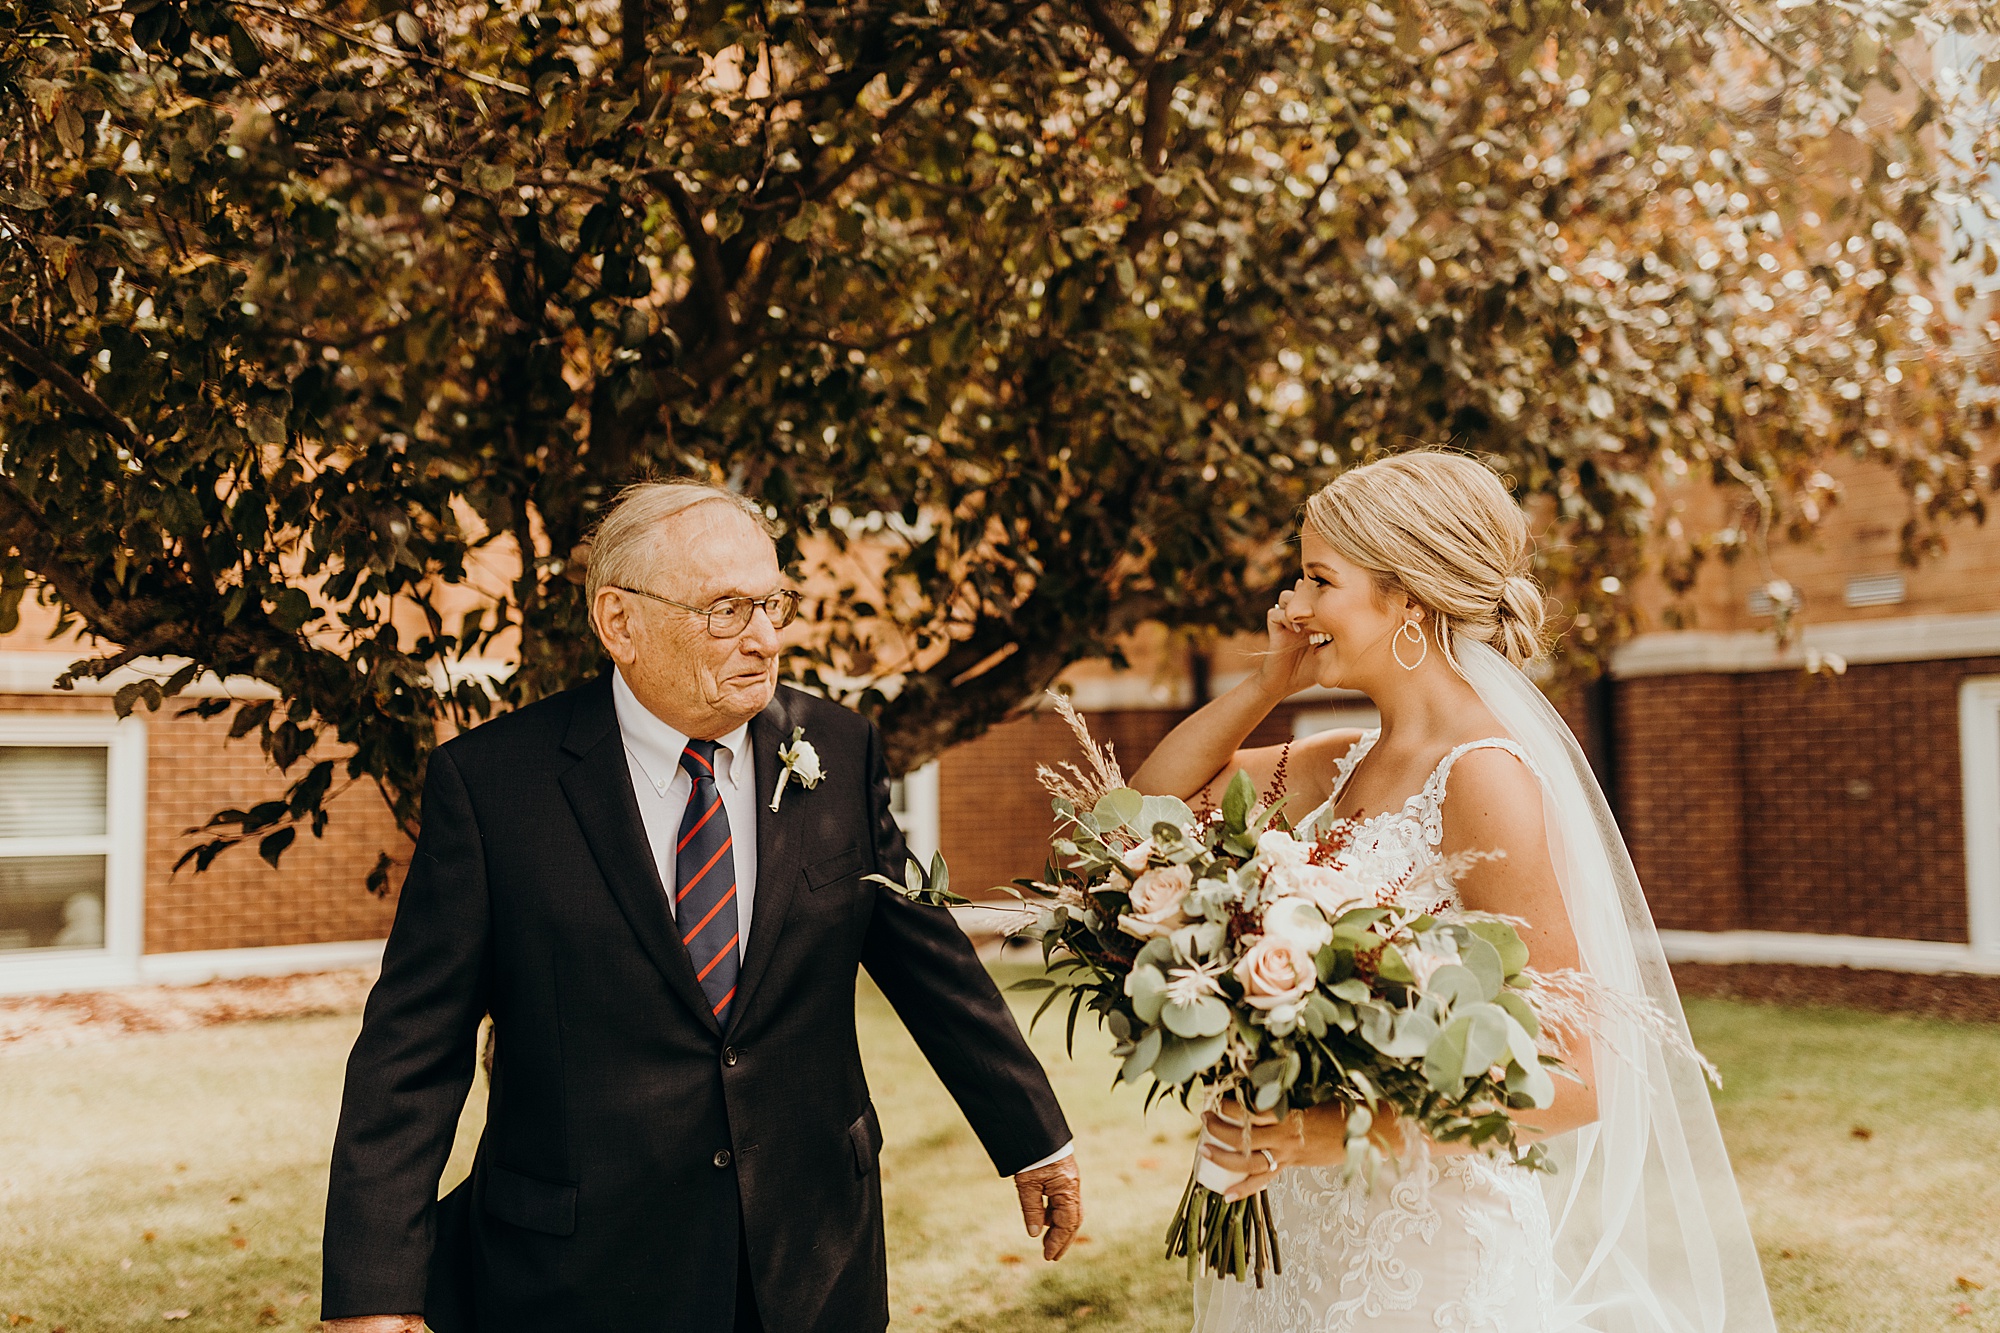 plan time with special people on your wedding day like this grandfather and bride